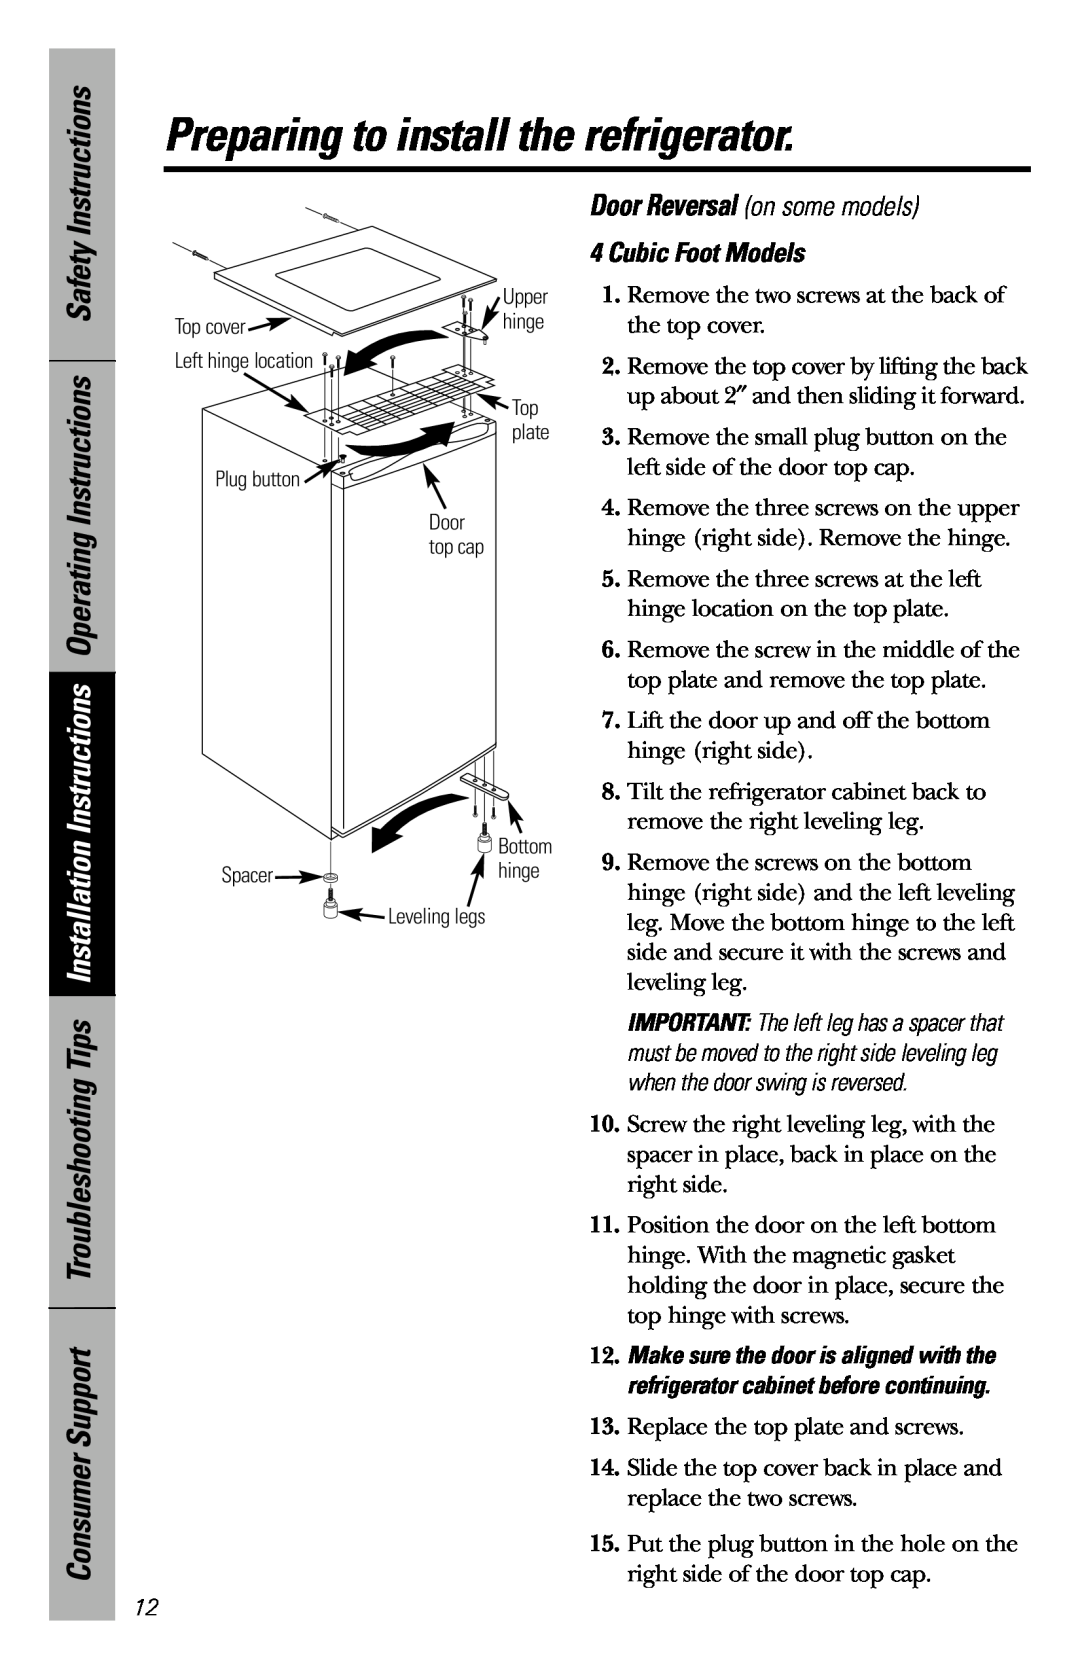 GE 49-60327 Instructions, Consumer, Cubic Foot Models, Preparing to install the refrigerator, Door Reversal on some models 